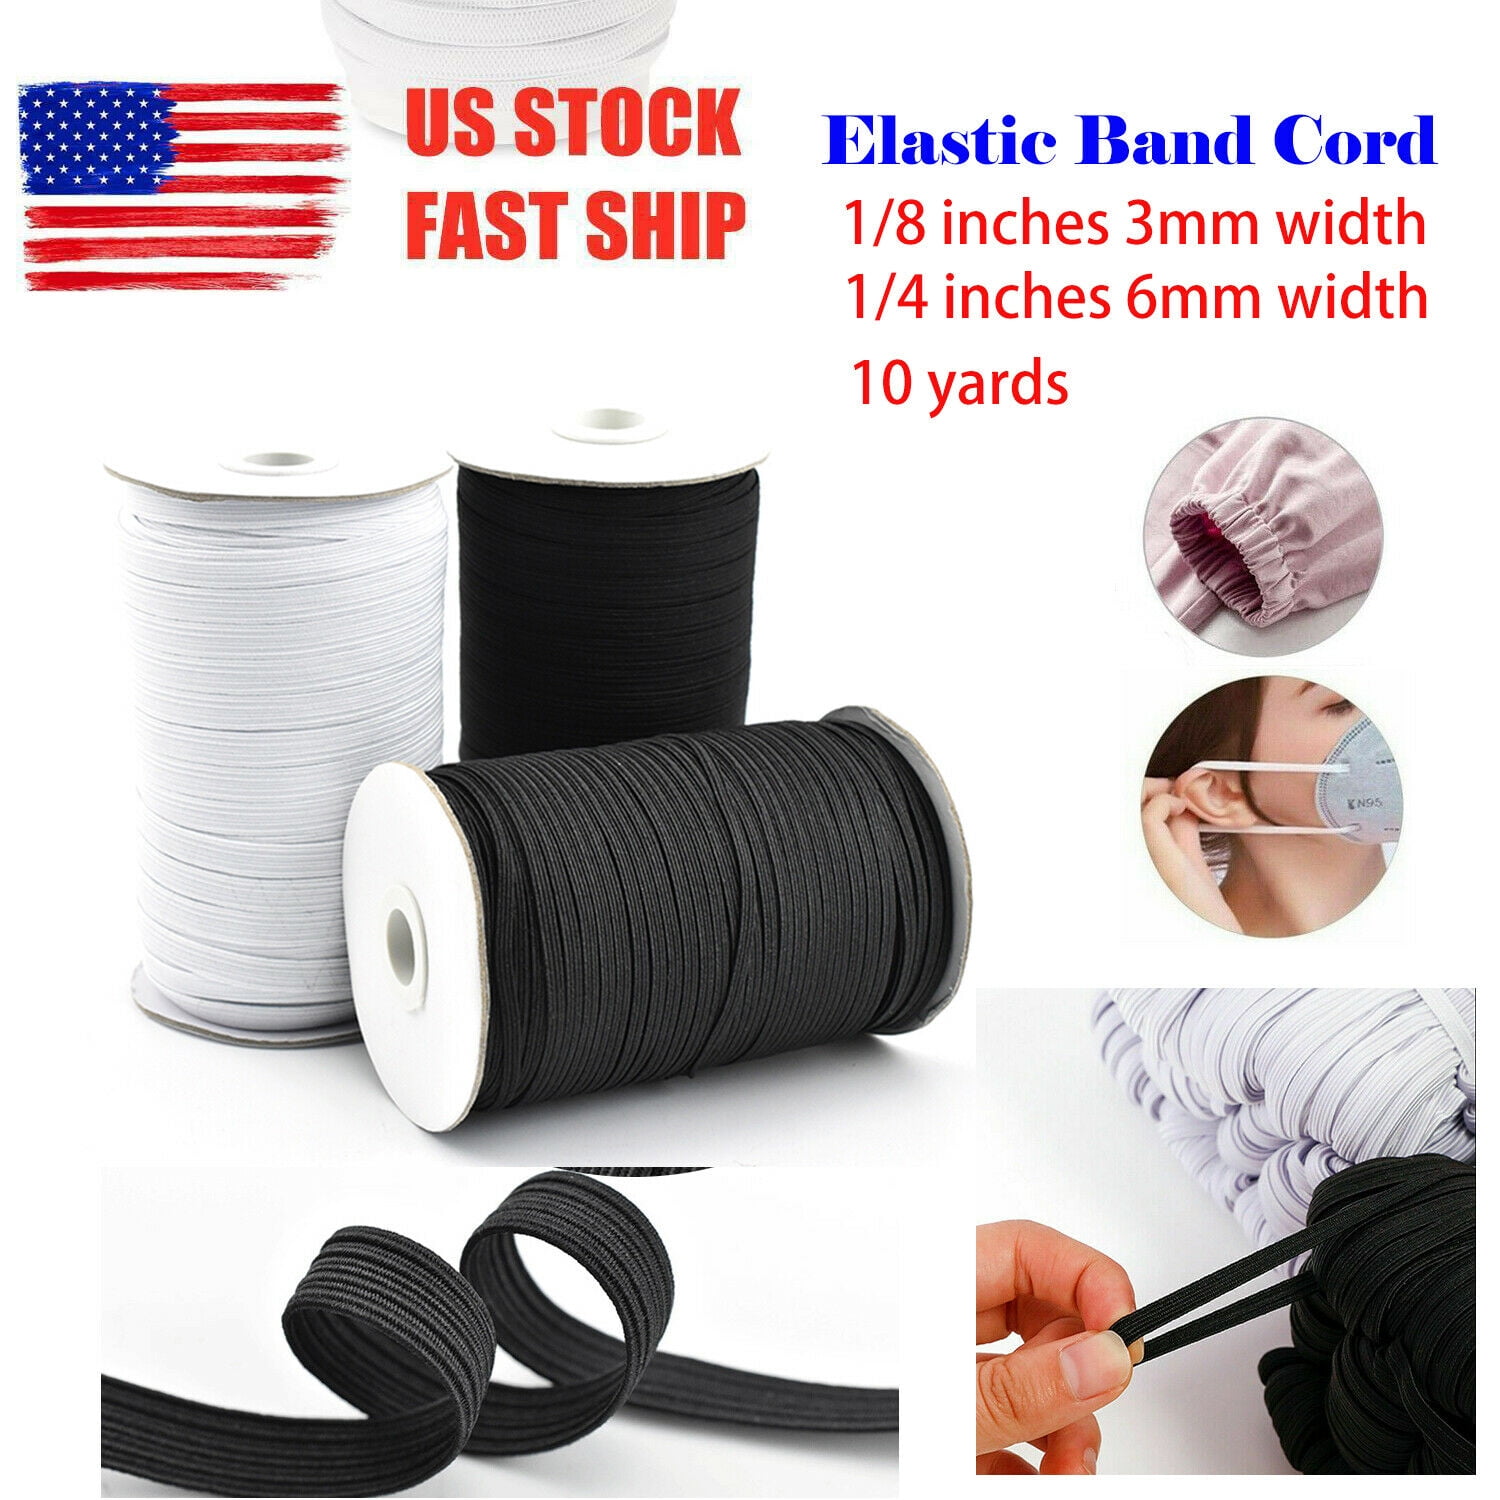 Craft Elastan Black 1/4 Inch Sewing Elastic Rope Cord String for Mask Making Stretch Elastic Band,FUTure 30ft Spool Knit Roll